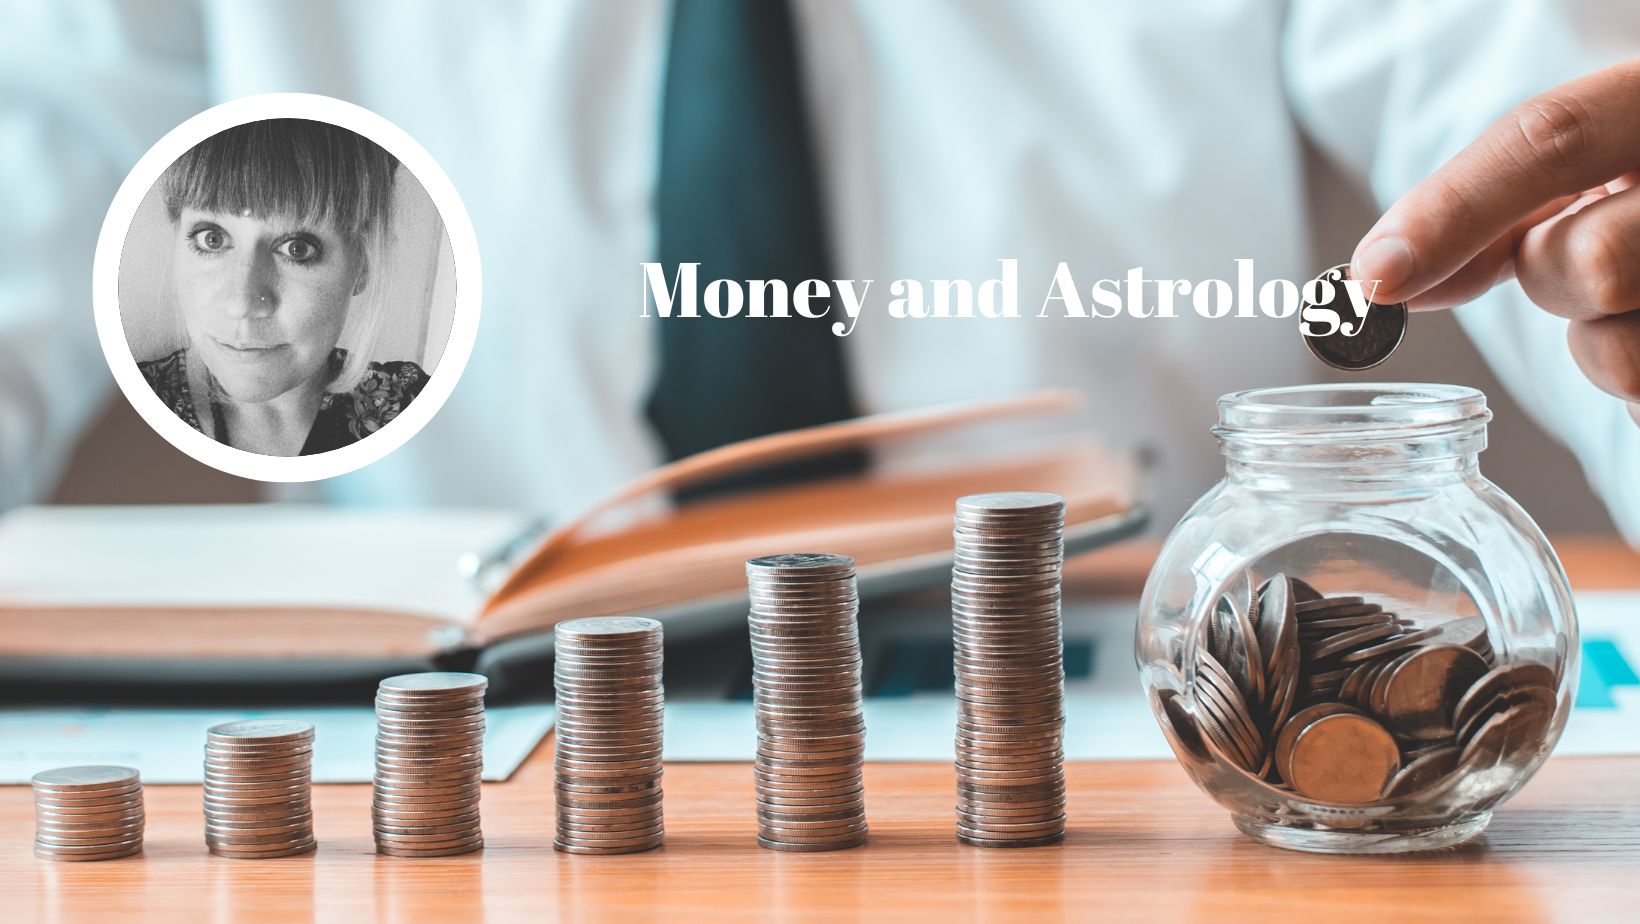 Money and Astrology